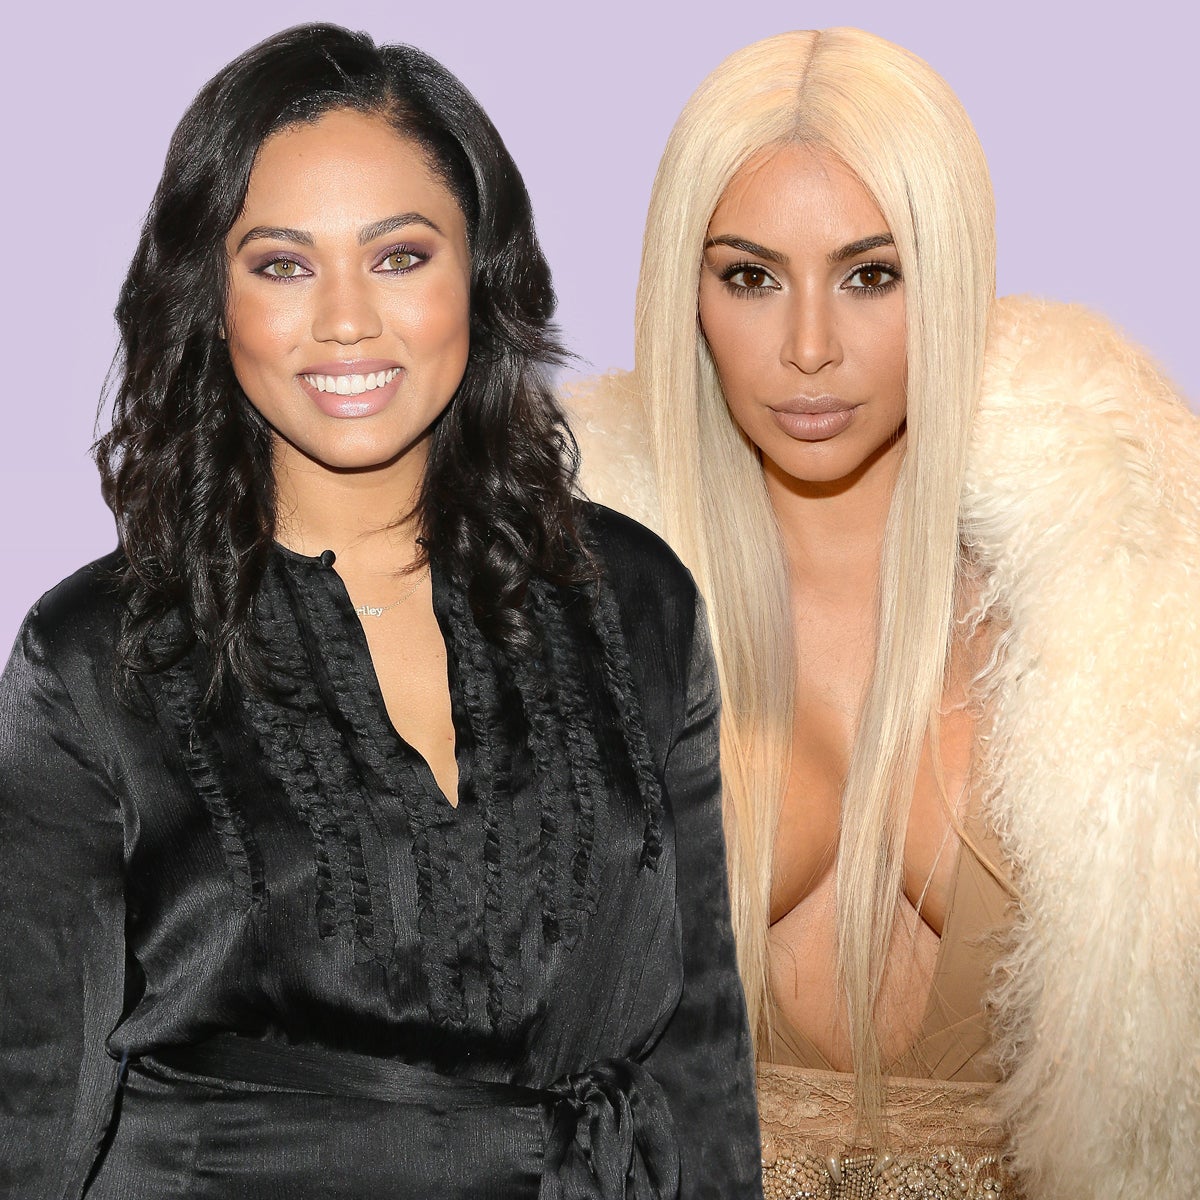 Kim Kardashian and Ayesha Curry Can Coexist - Stop Comparing Women!